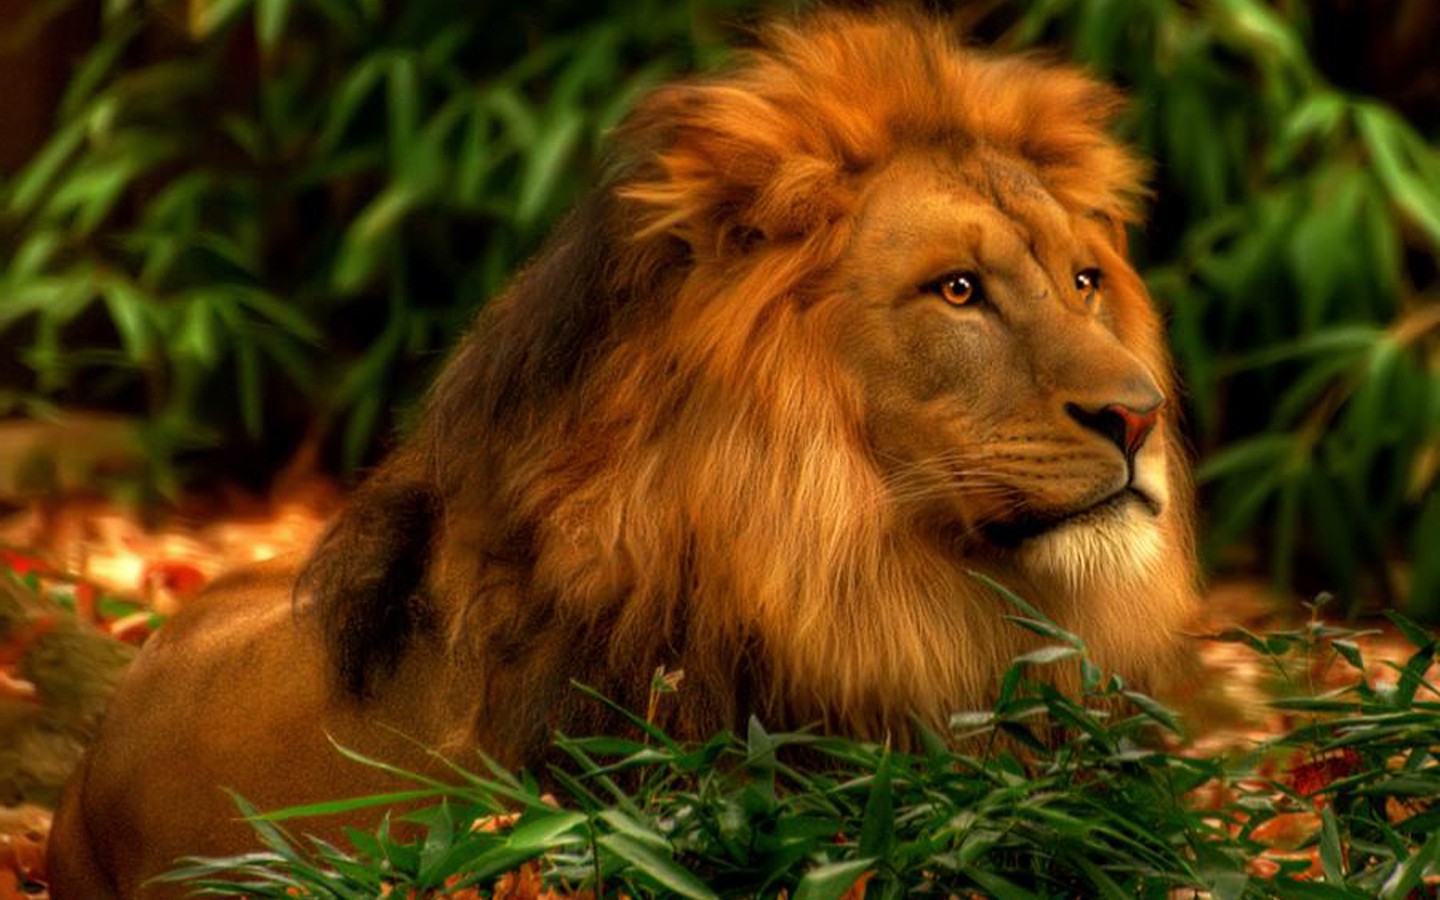 Amazing Hd Lion Wallpaper For Android of all time The ultimate guide 